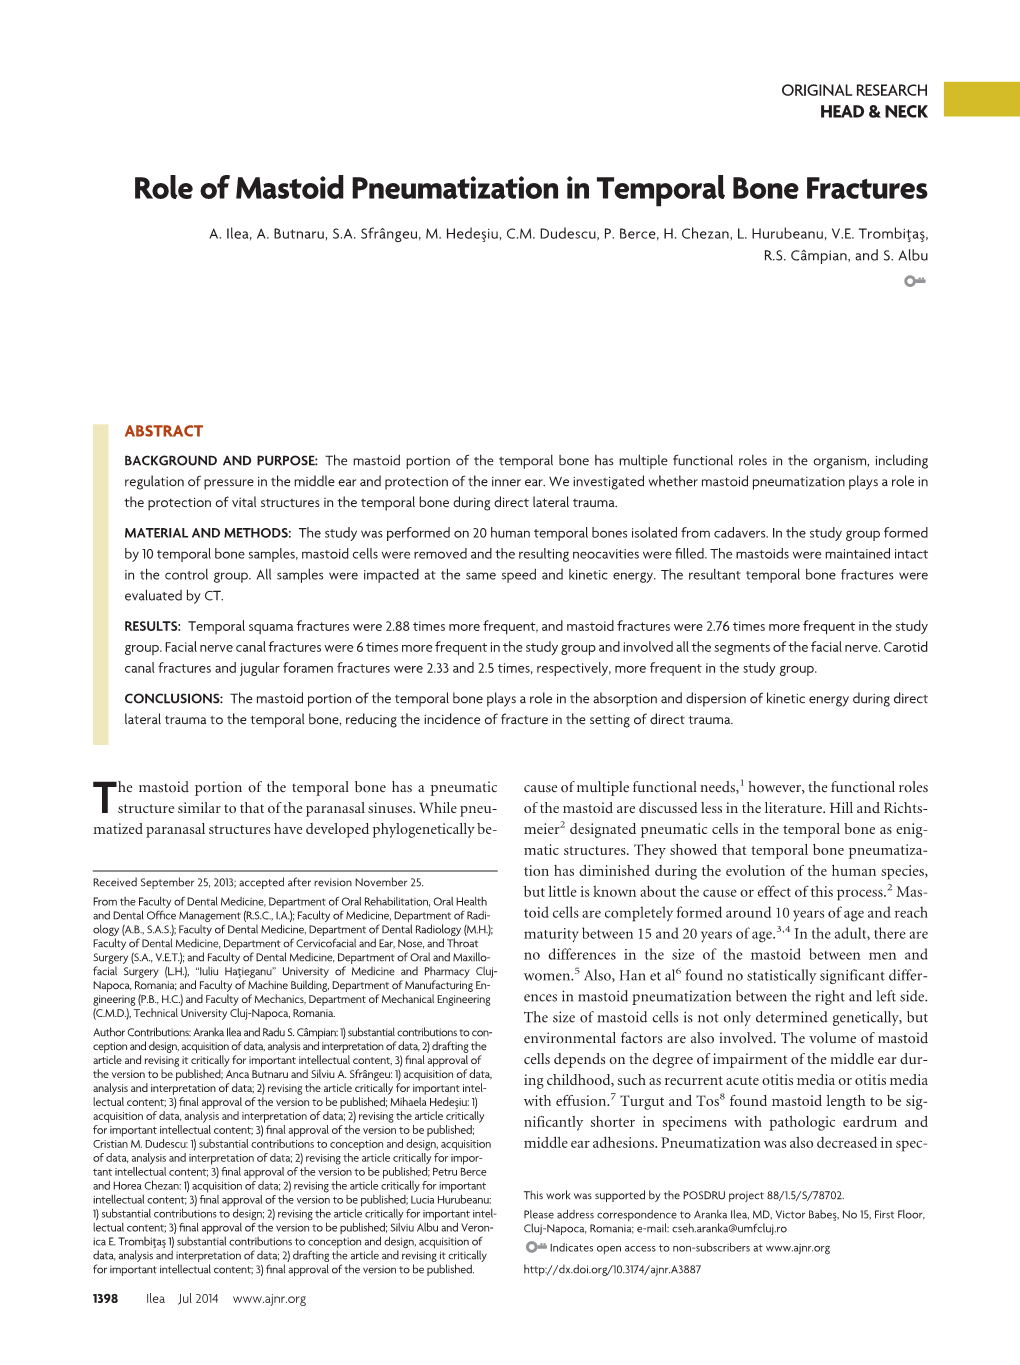 Role of Mastoid Pneumatization in Temporal Bone Fractures